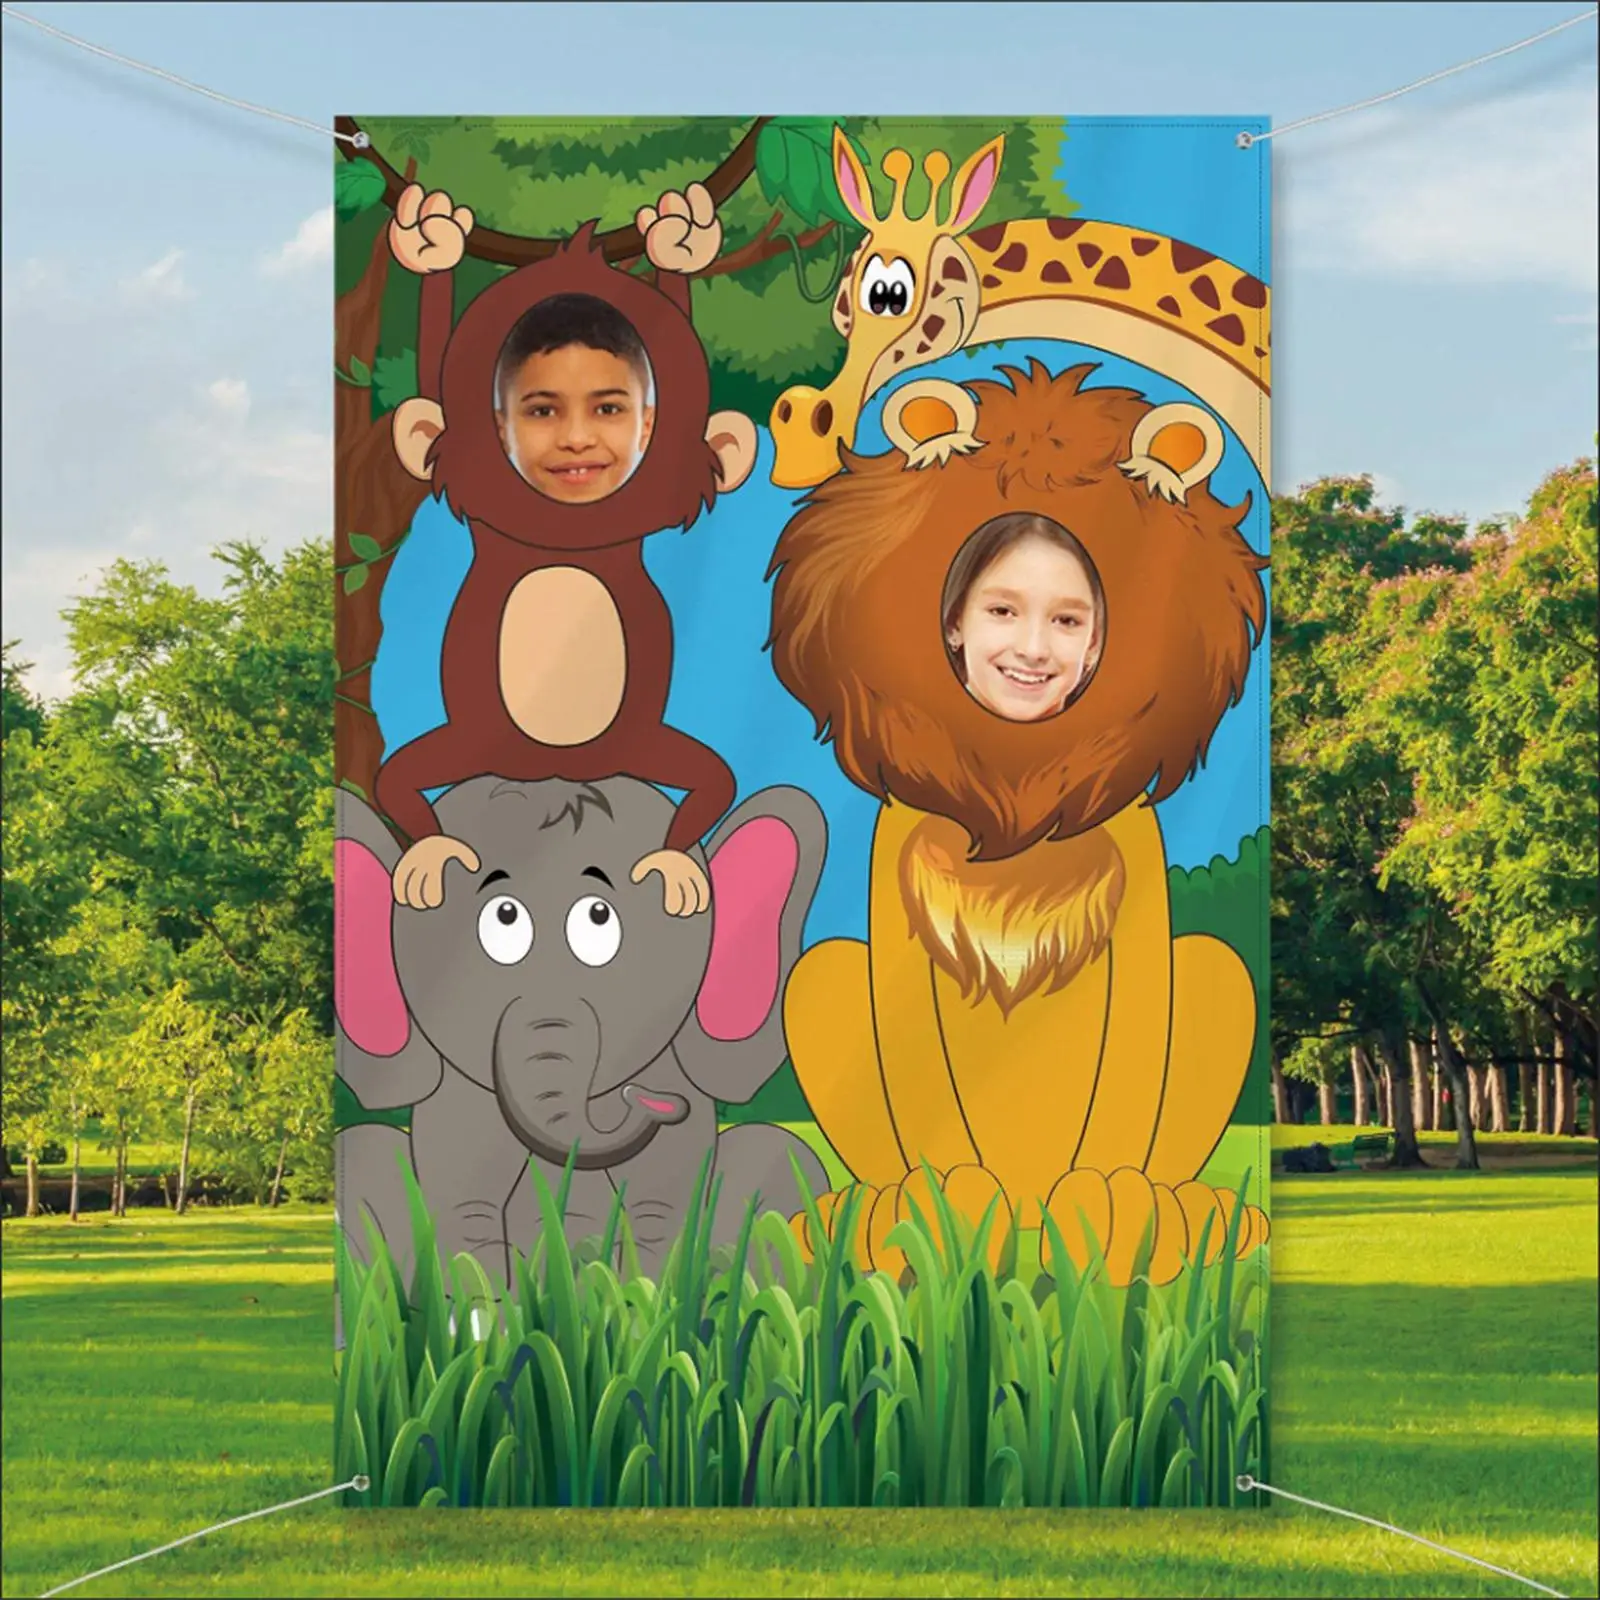 Wild  Photo Prop Backdrop with Zoo Animals Elements Party Pictures 59 x 39 inch Birthday with 4 M String Bright Colors Durable